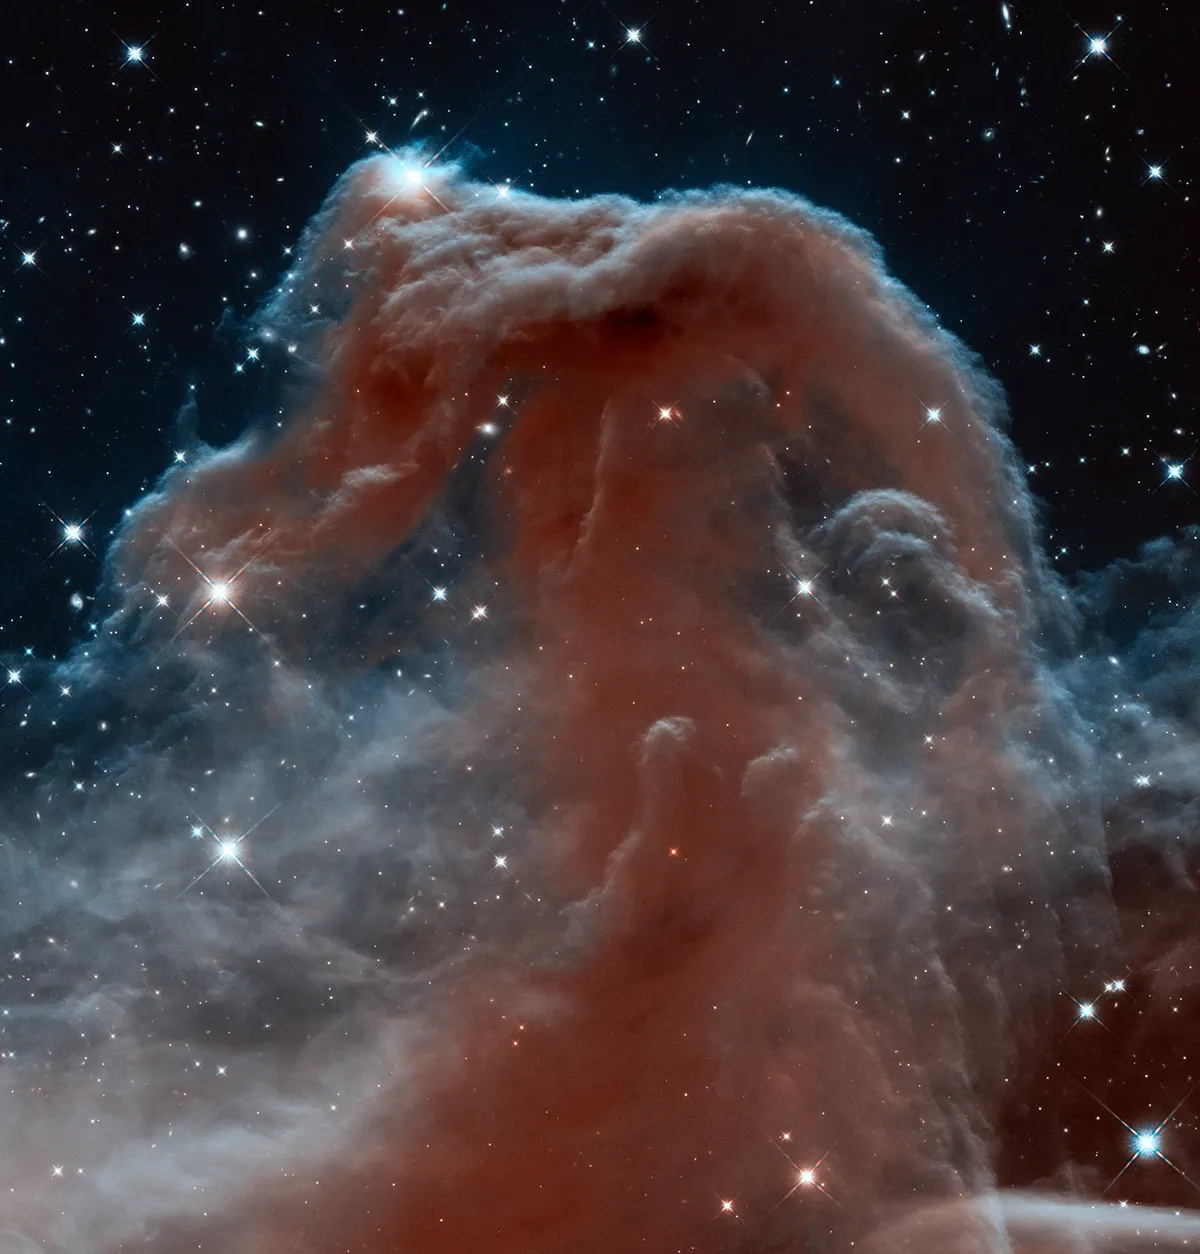 To celebrate its 23rd year, Hubble released this dramatic infrared view of the Horsehead Nebula, revealing a fragile-lookng structure with folds of gas and dust. Credit: Copyright: NASA, ESA, and the Hubble Heritage Team (AURA/STScI)